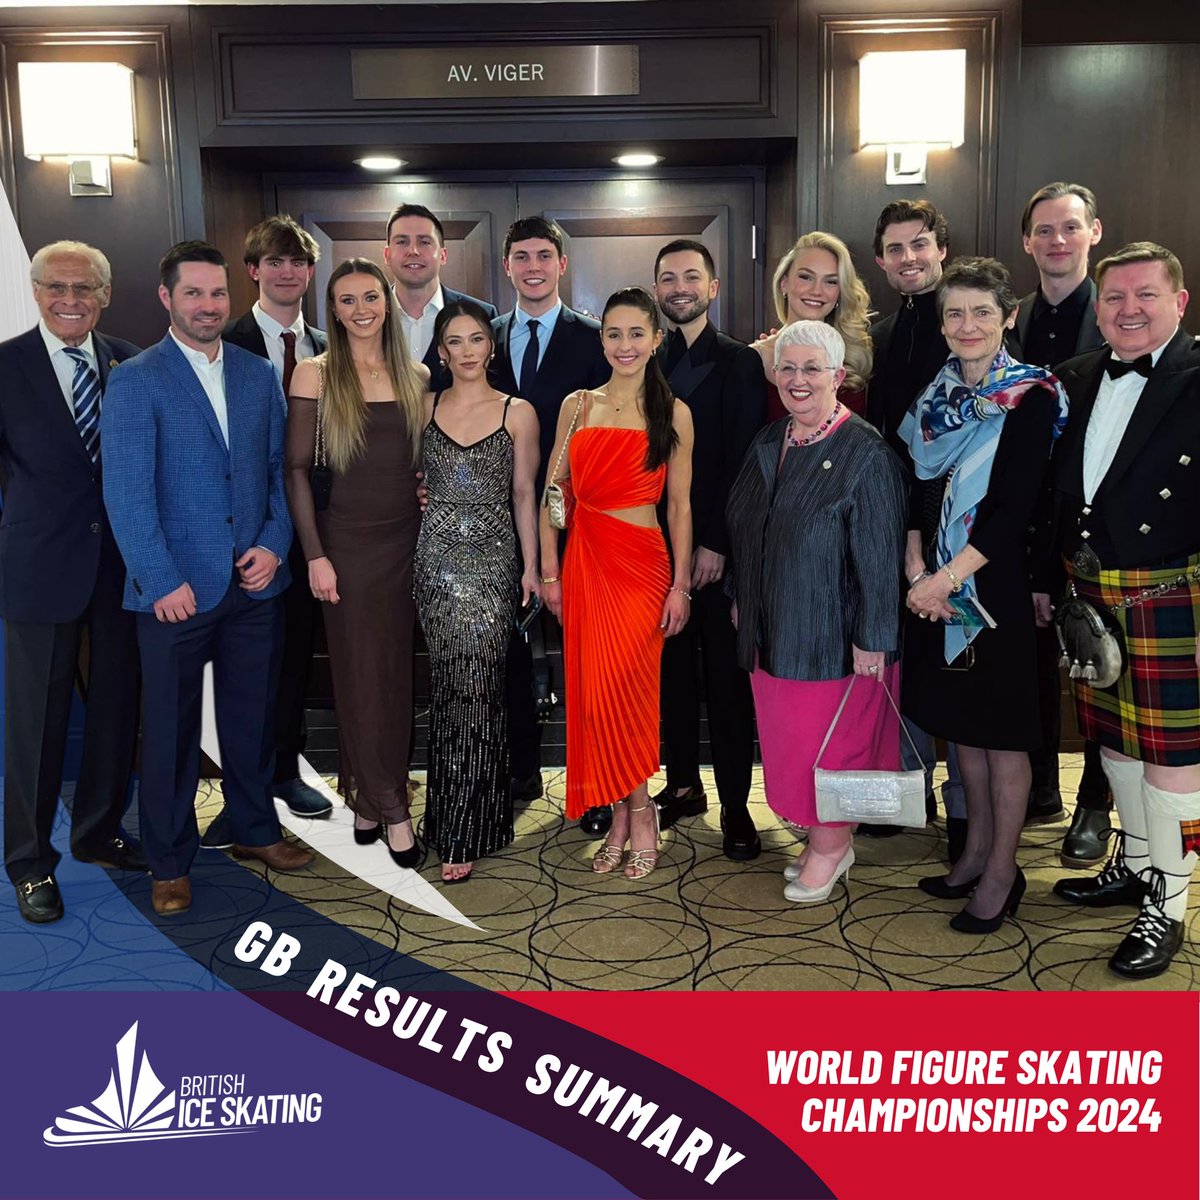 🇬🇧The British contingent looking sharp at the Worlds Gala!

Find out how these fantastic athletes got on at the World Figure Skating Championships: iceskating.org.uk/post/fear-gibs…

#BritishAthletes #BritishSkaters #WorldsFigure #FigureSkating #UKSport